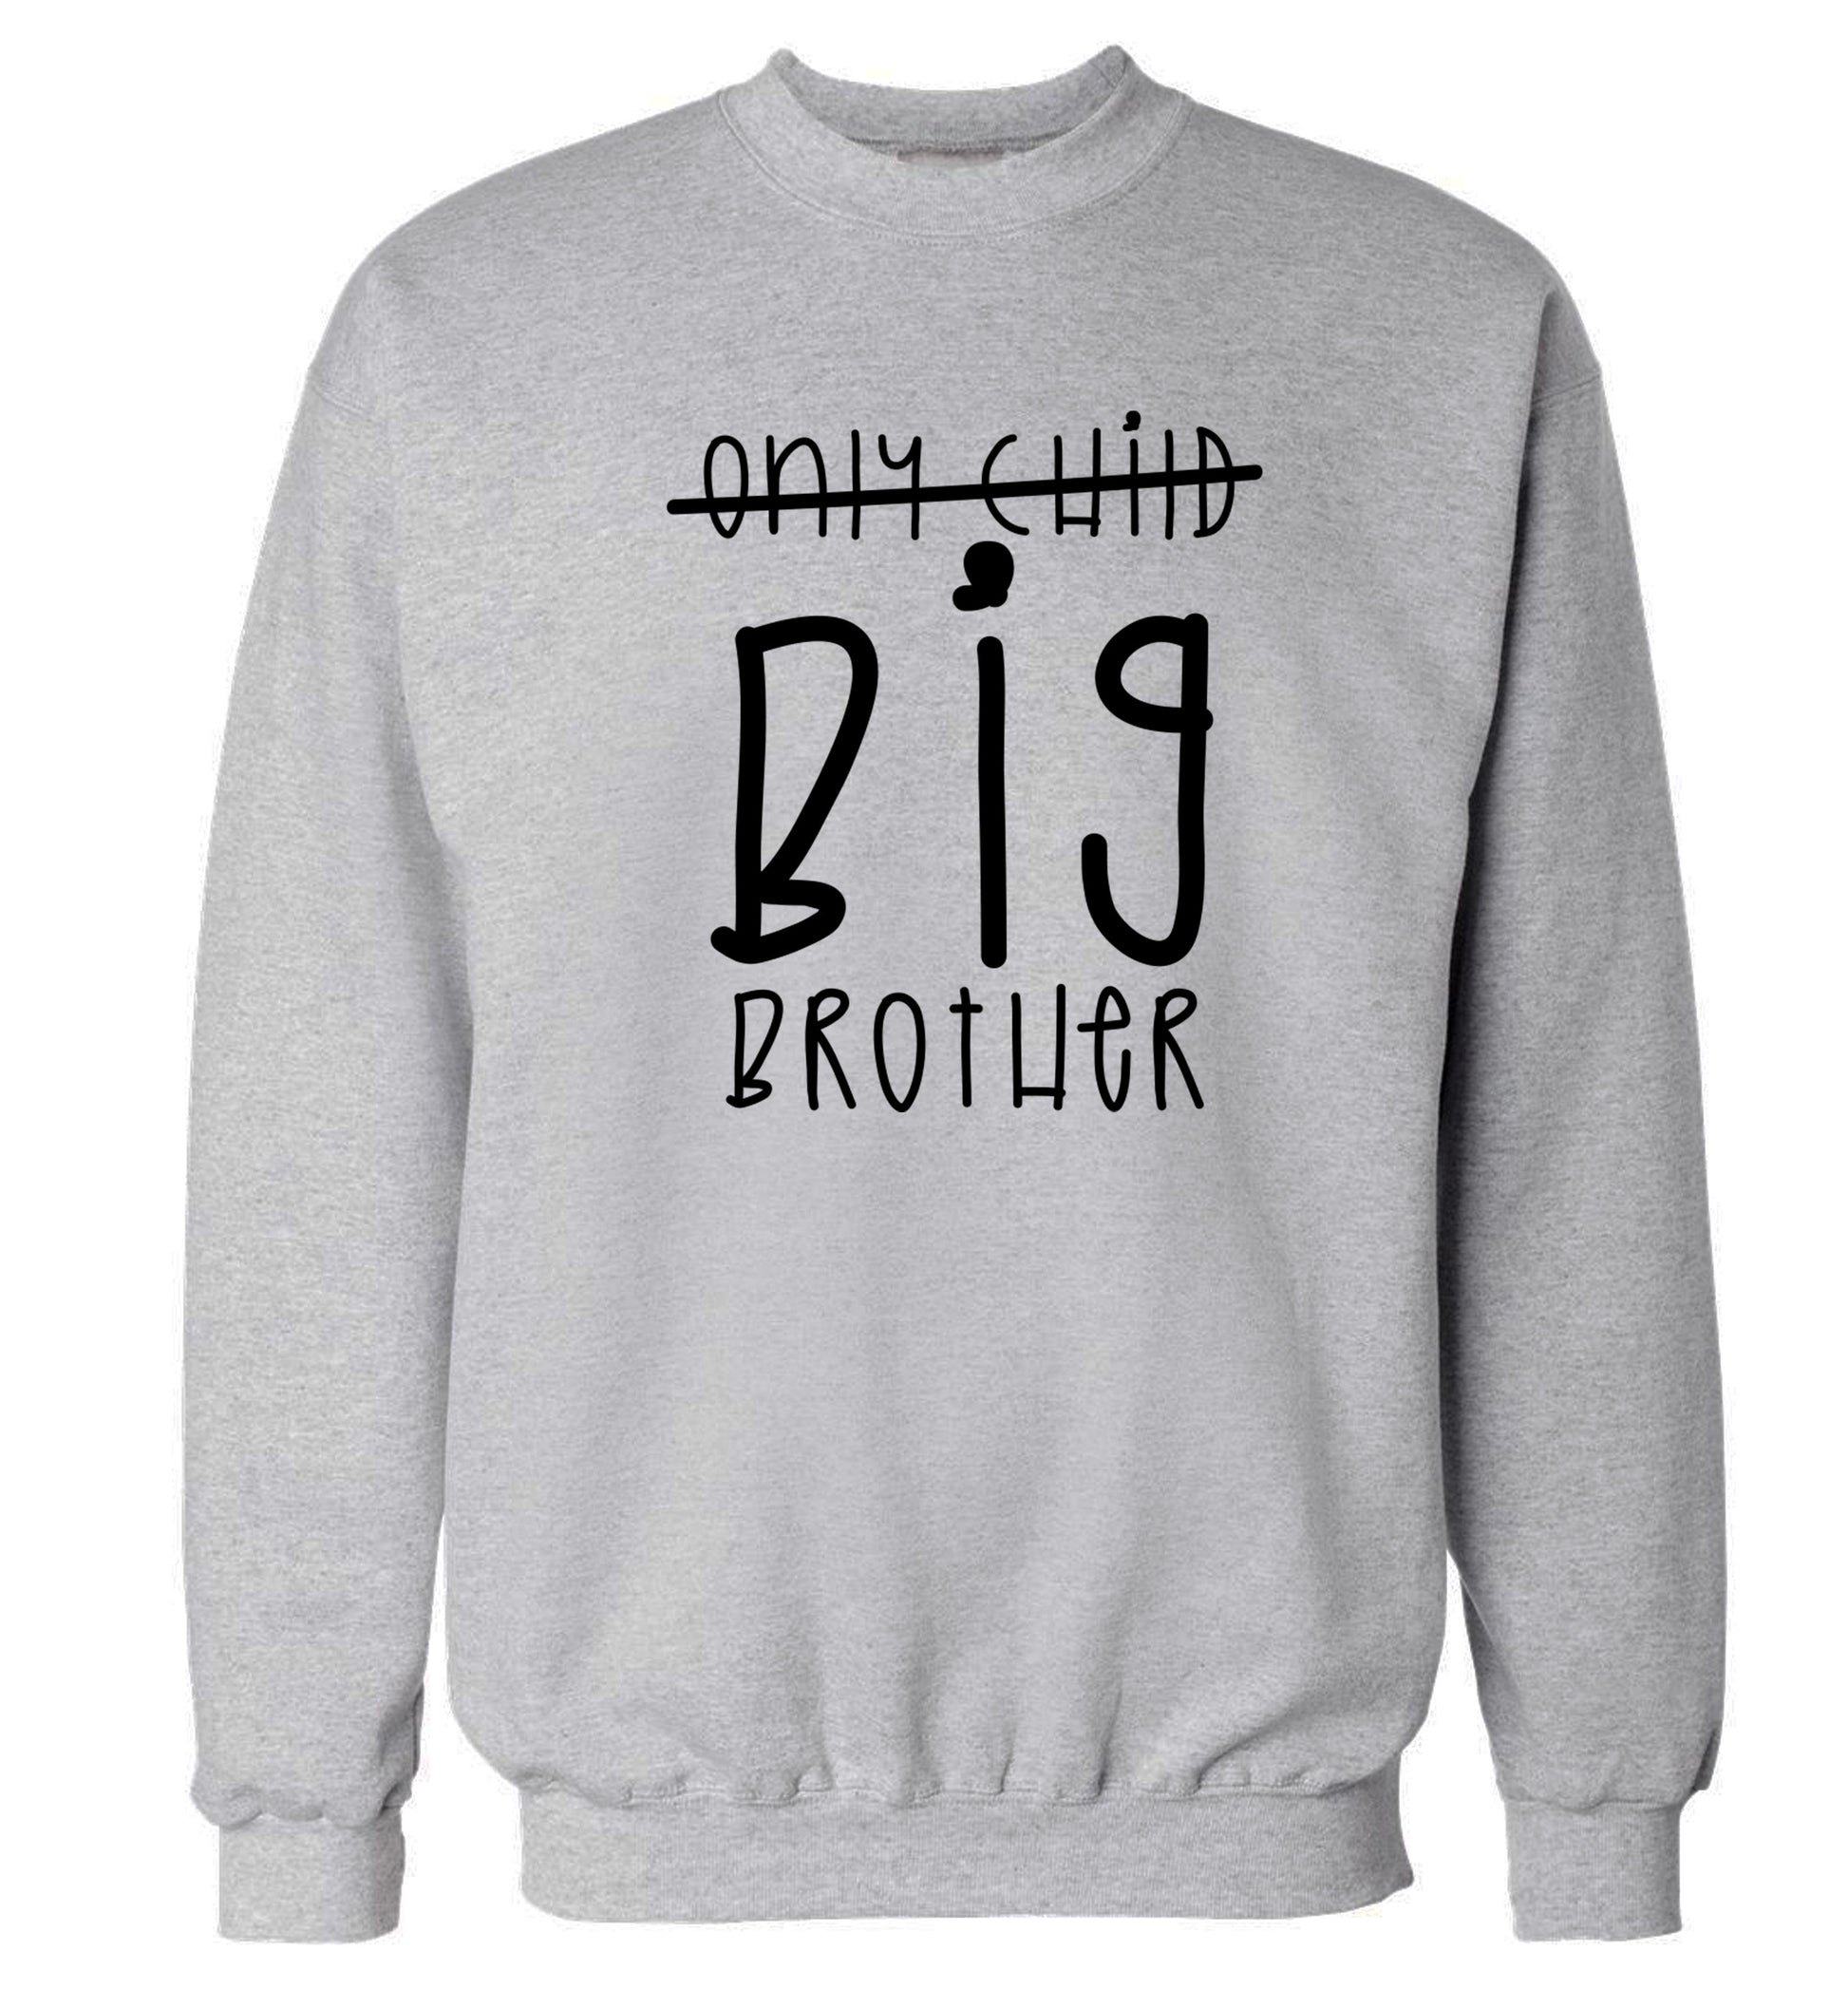 Only child big brother Adult's unisex grey Sweater 2XL